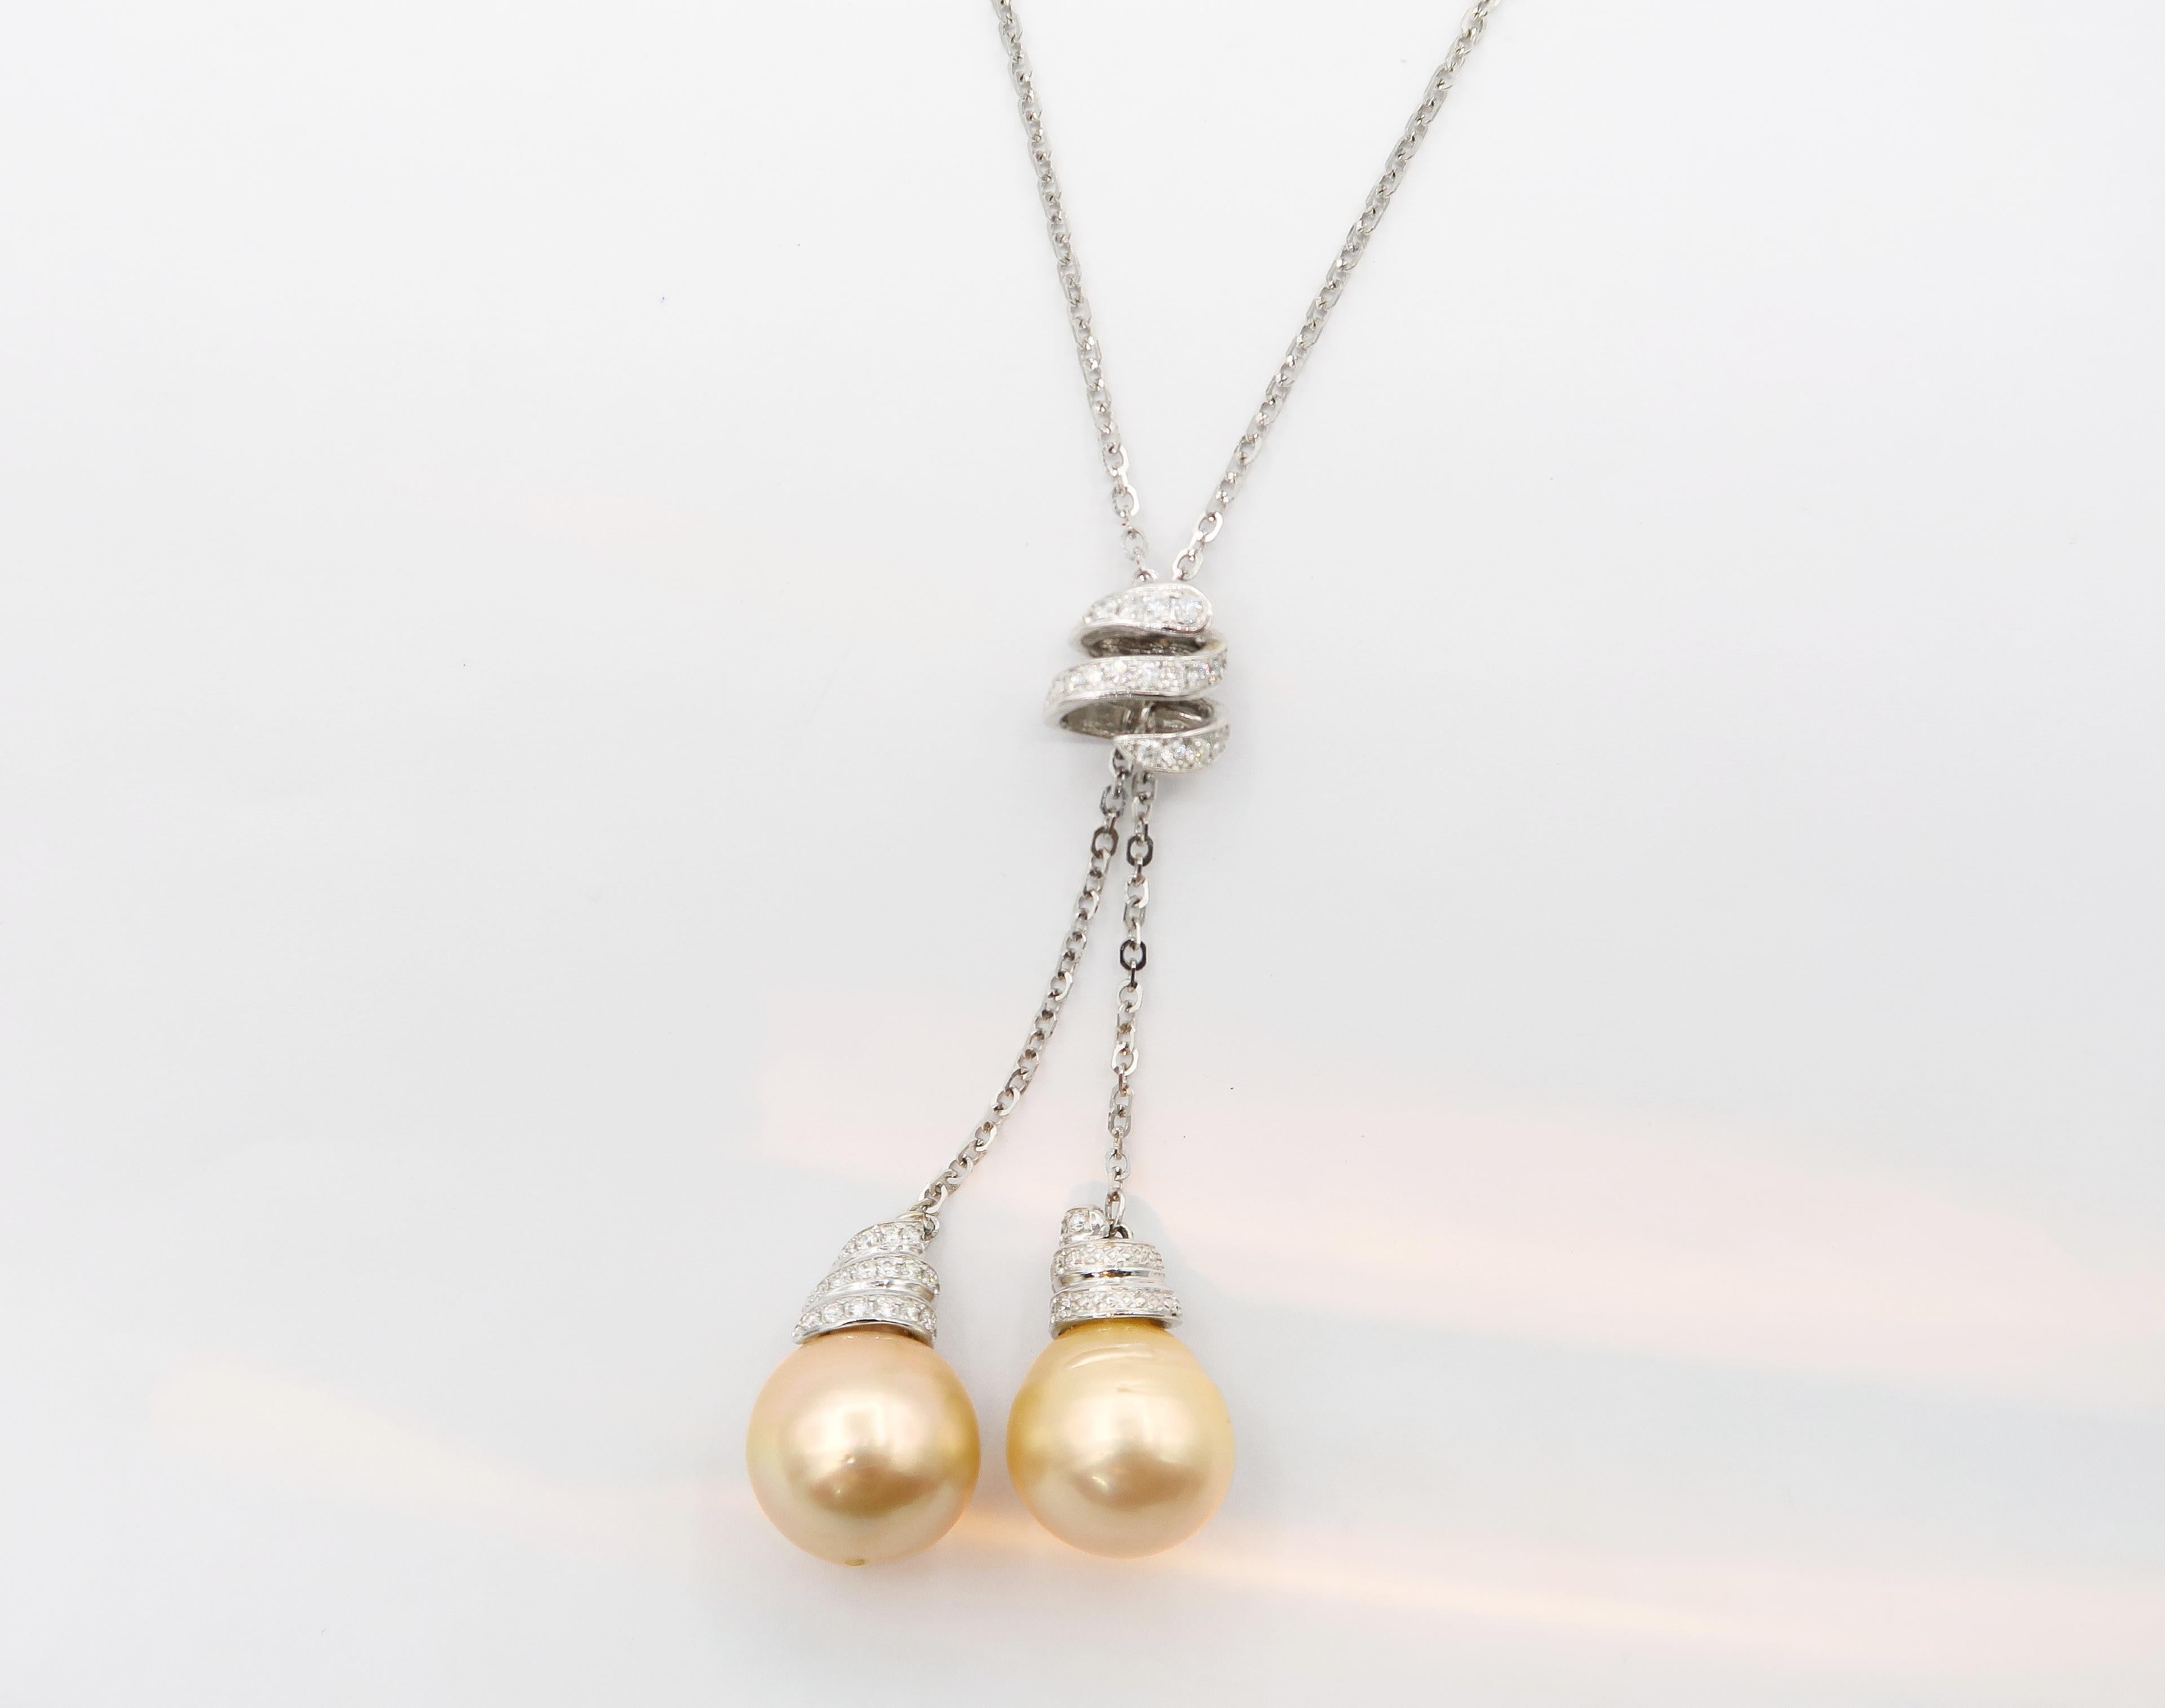 Double Golden South Sea Pearl Drop Necklace in 18K White Gold with Diamonds

Length: 16 inches

Gold: 18K White Gold, 12.98 g
Diamond: 0.78 ct
Pearl: 2 pieces, Golden South Sea, 14.5 mm